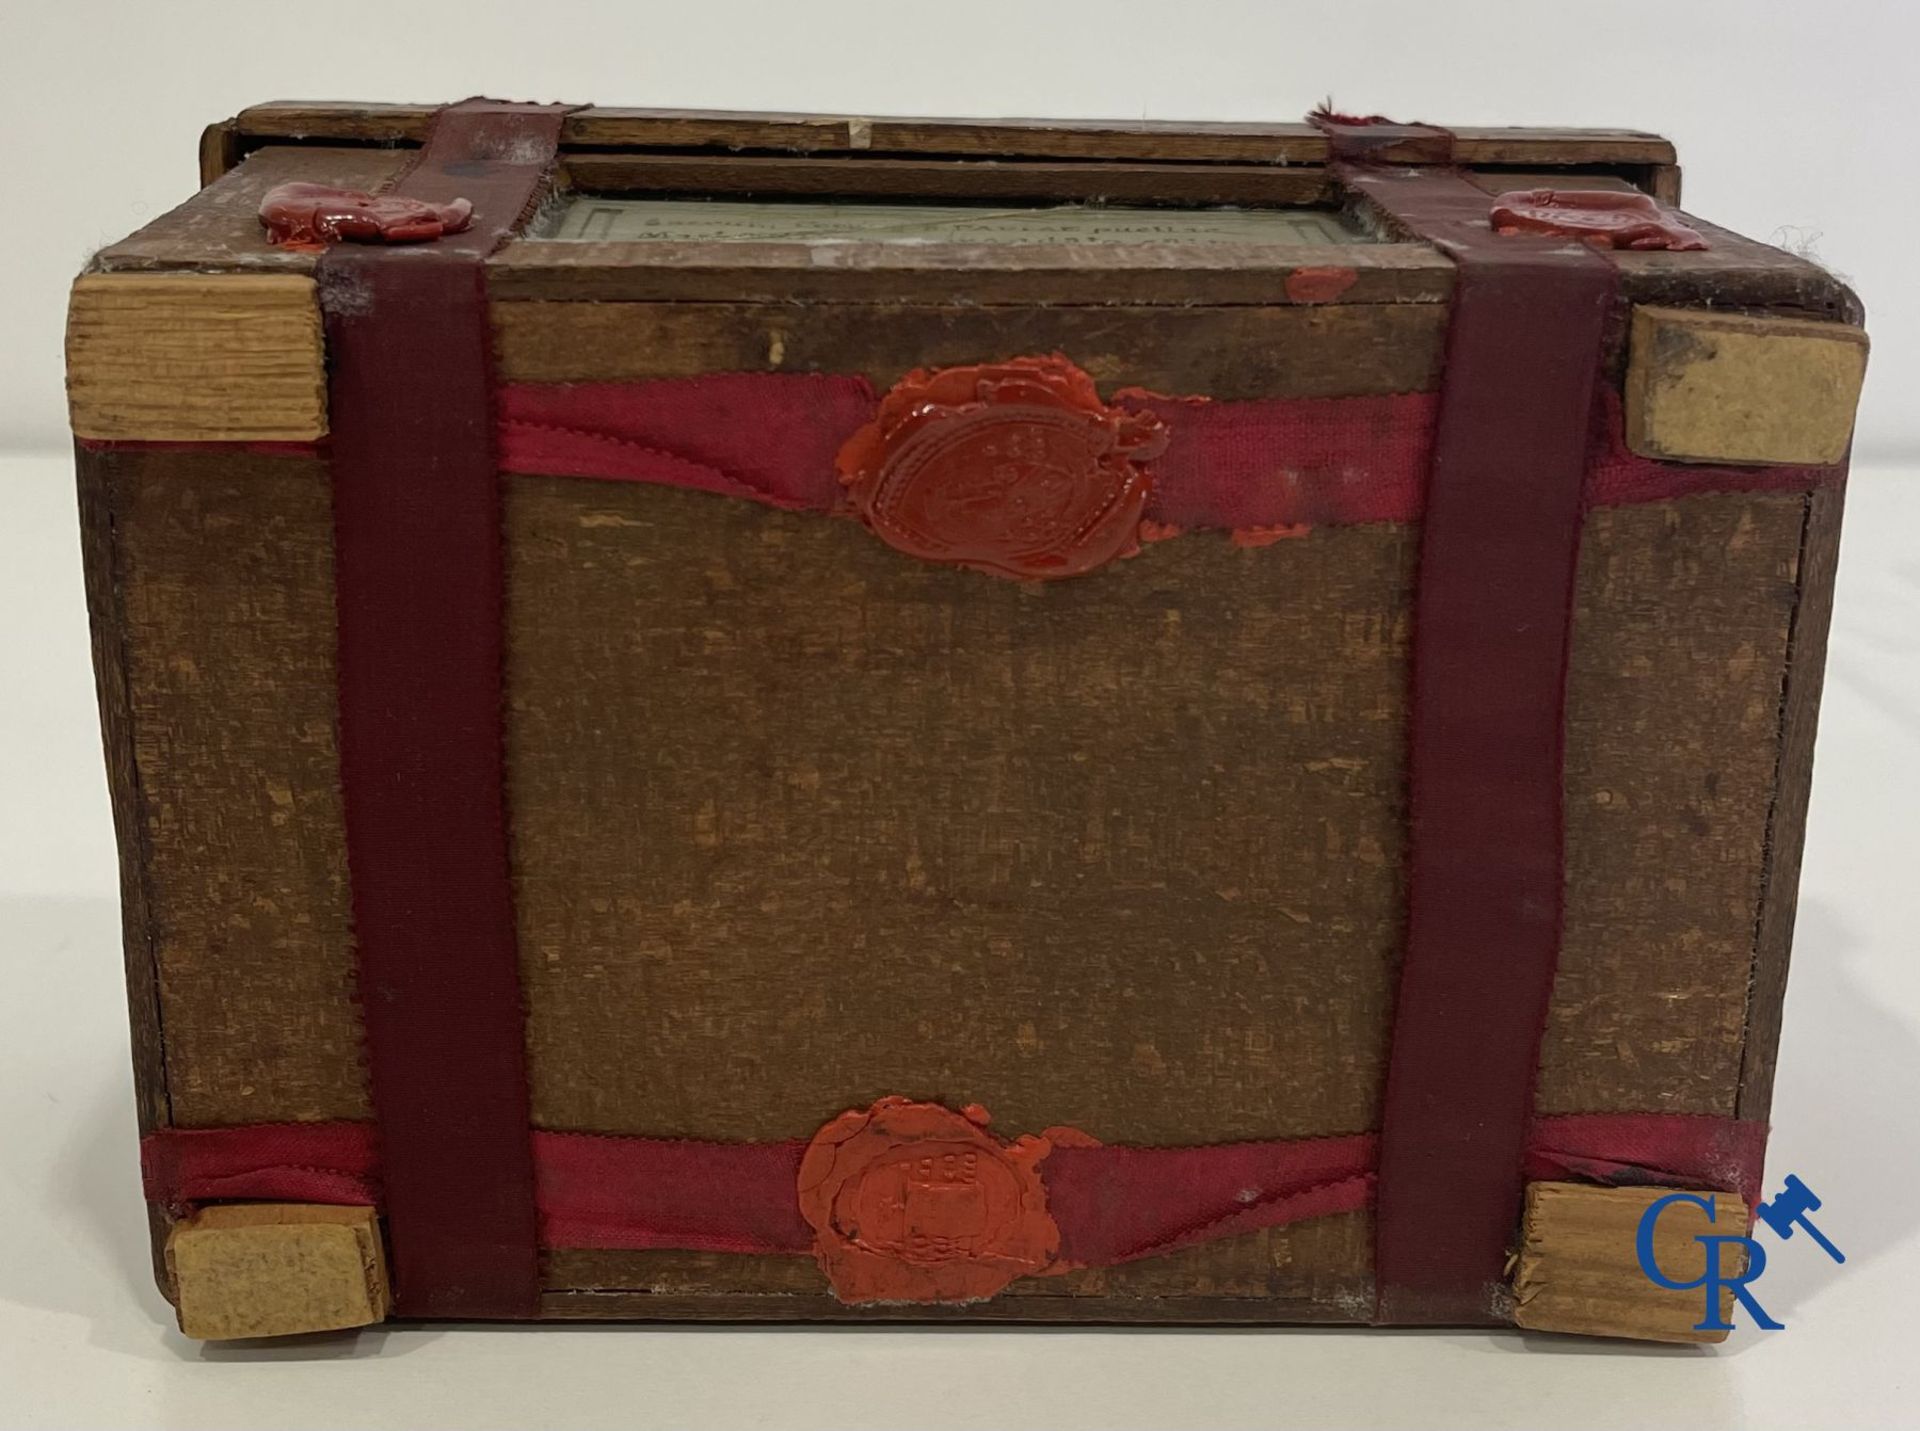 An antique wooden reliquary sealed with wax seals. Early 19th century. - Image 14 of 15